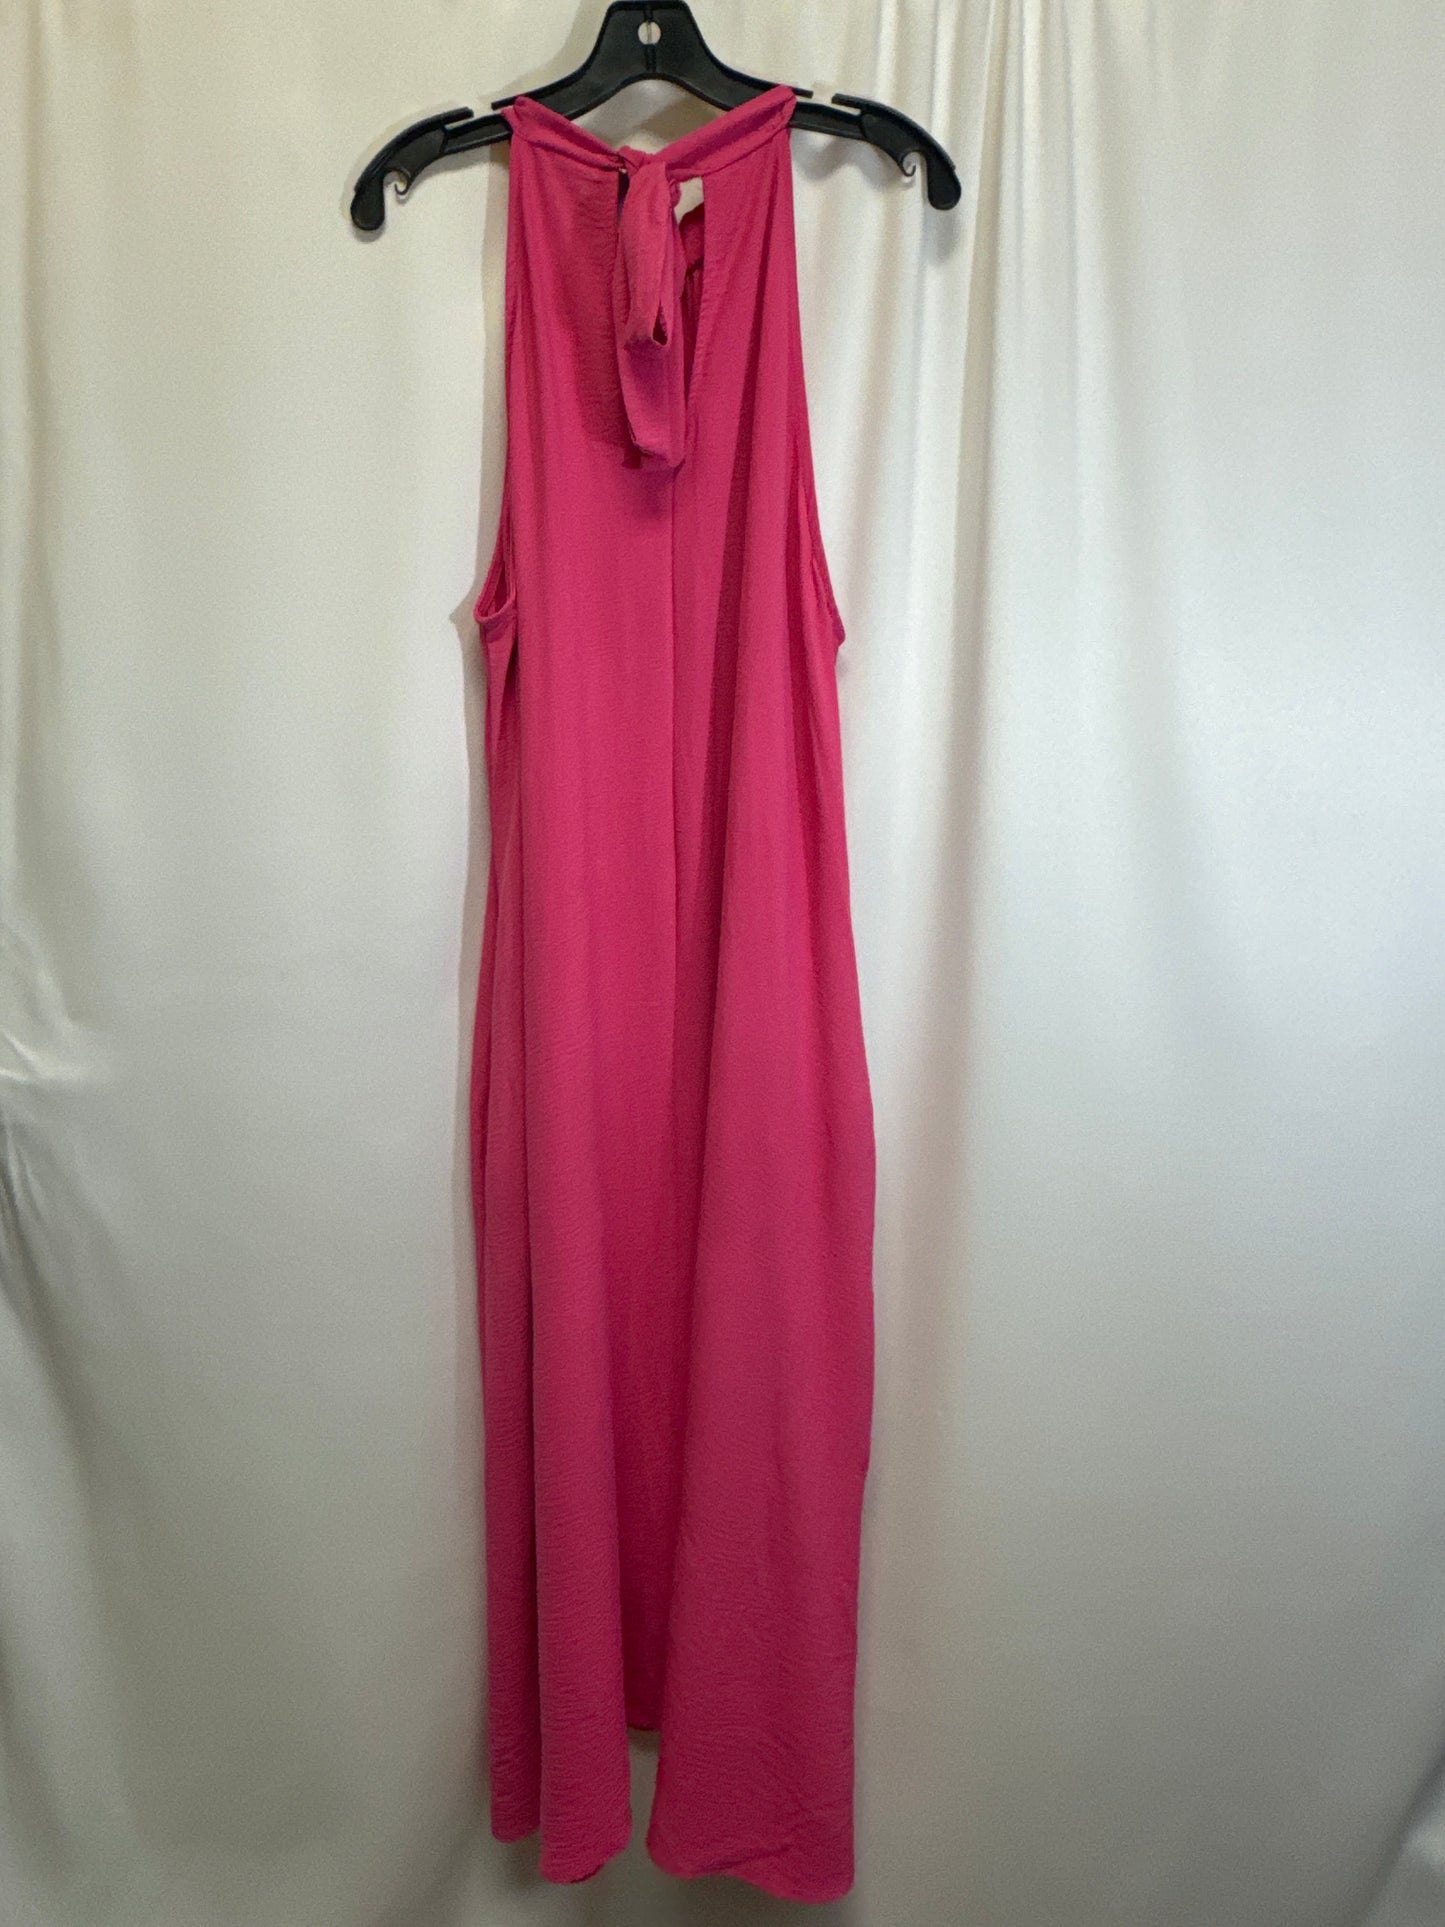 Pink Dress Casual Maxi Clothes Mentor, Size 1x